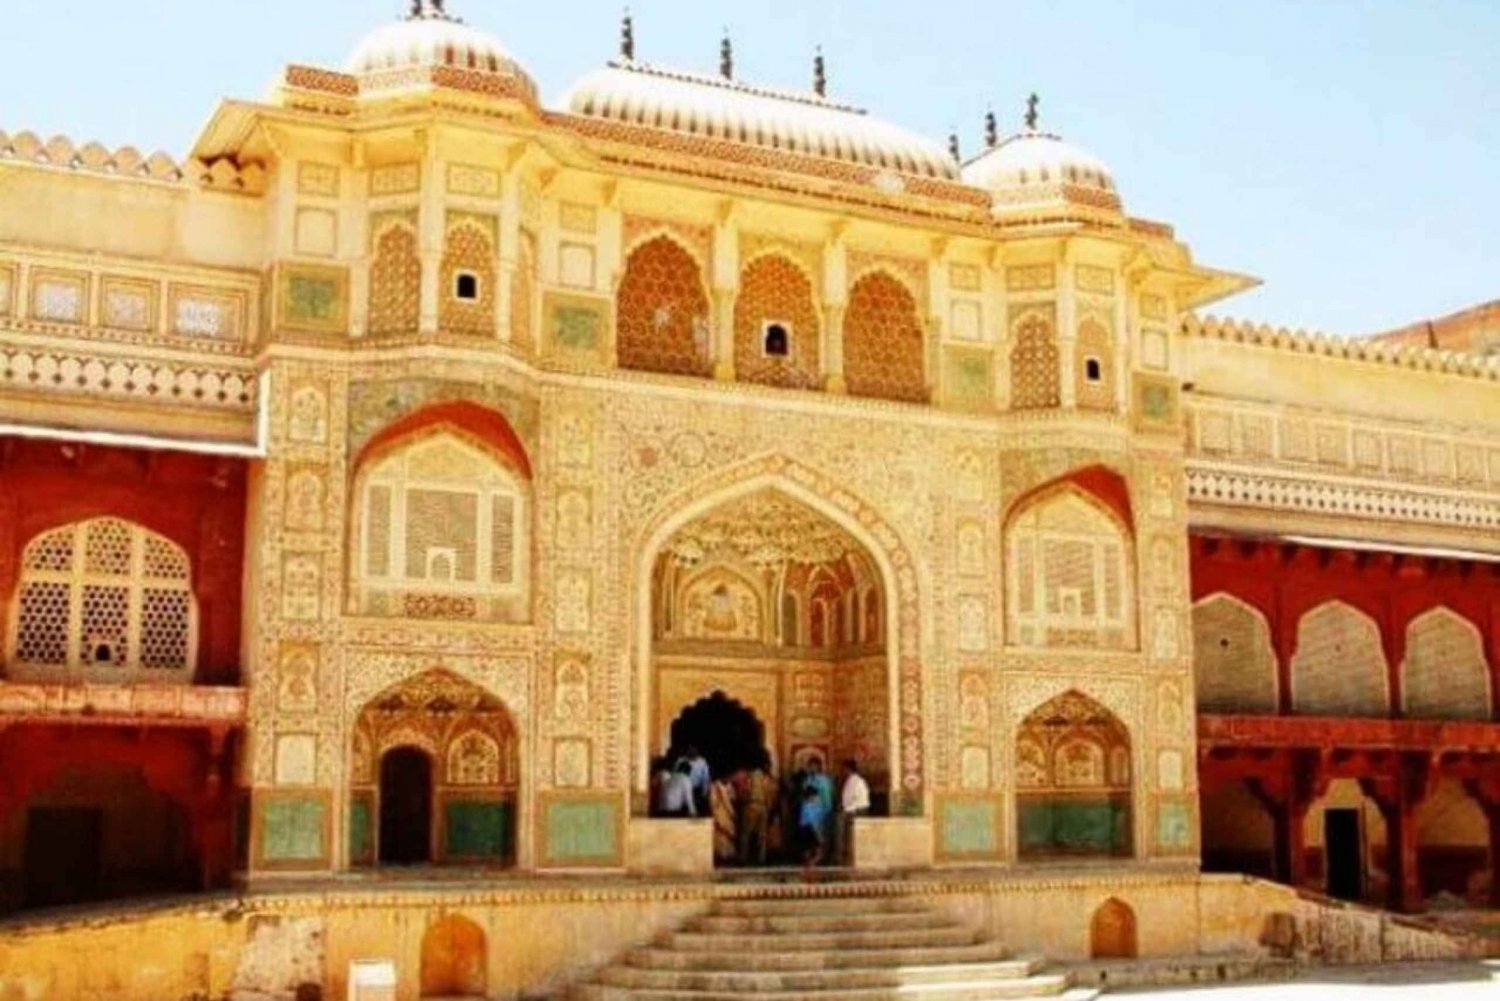 Private:All Inclusive Jaipur 5 Hours Local Trip By Guide.